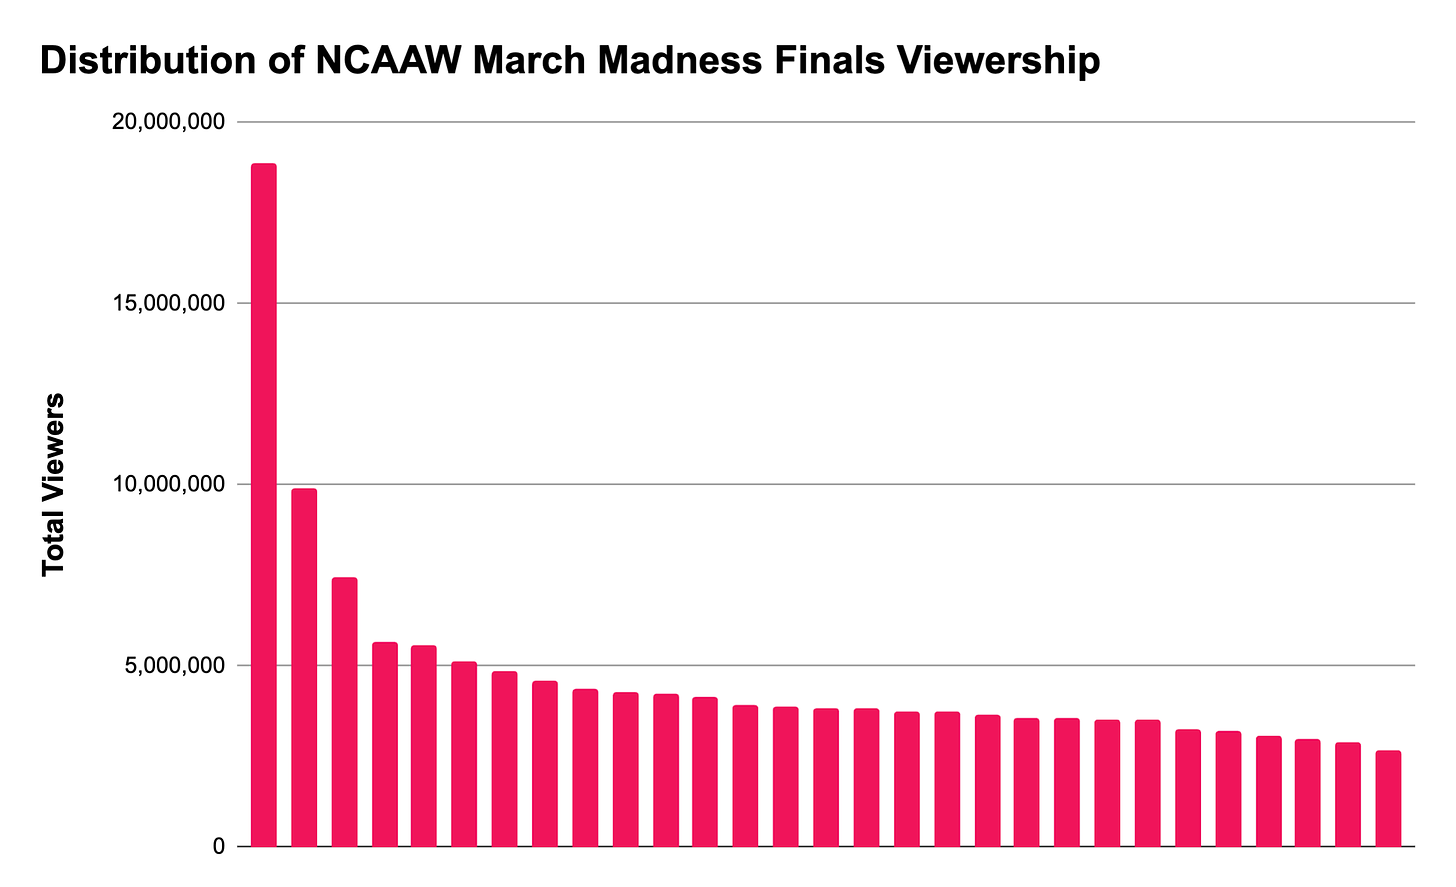 Distribution of NCAAW March Madness Finals Viewership